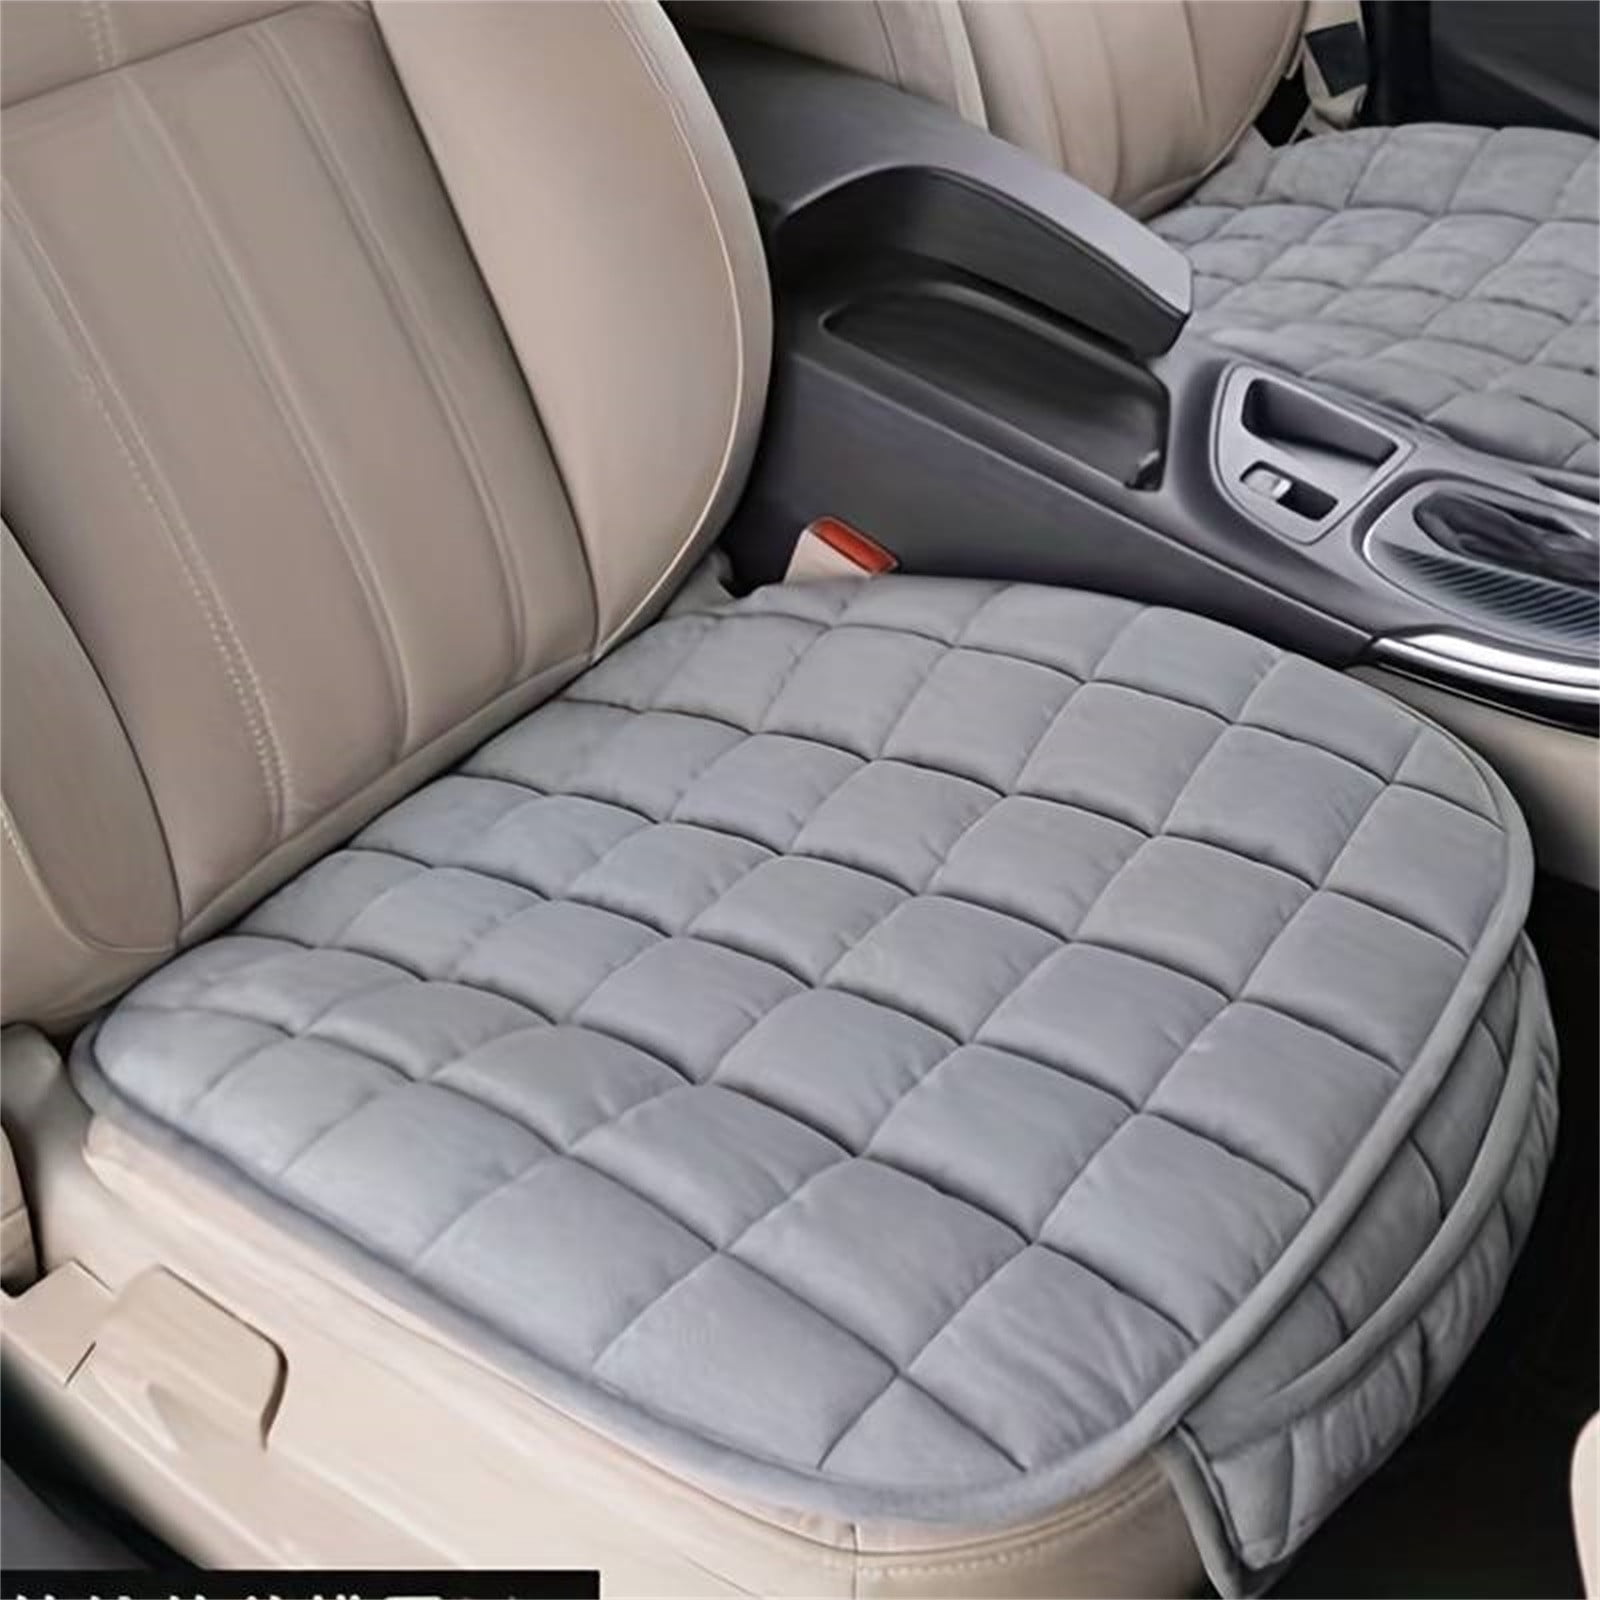 Tiitstoy 1 Pack Car Seat Cushion, Non-Slip Rubber Bottom with Storage Pouch, Premium Comfort Memory Foam, Driver Seat Back Seat Cushion, Car Seat Pad